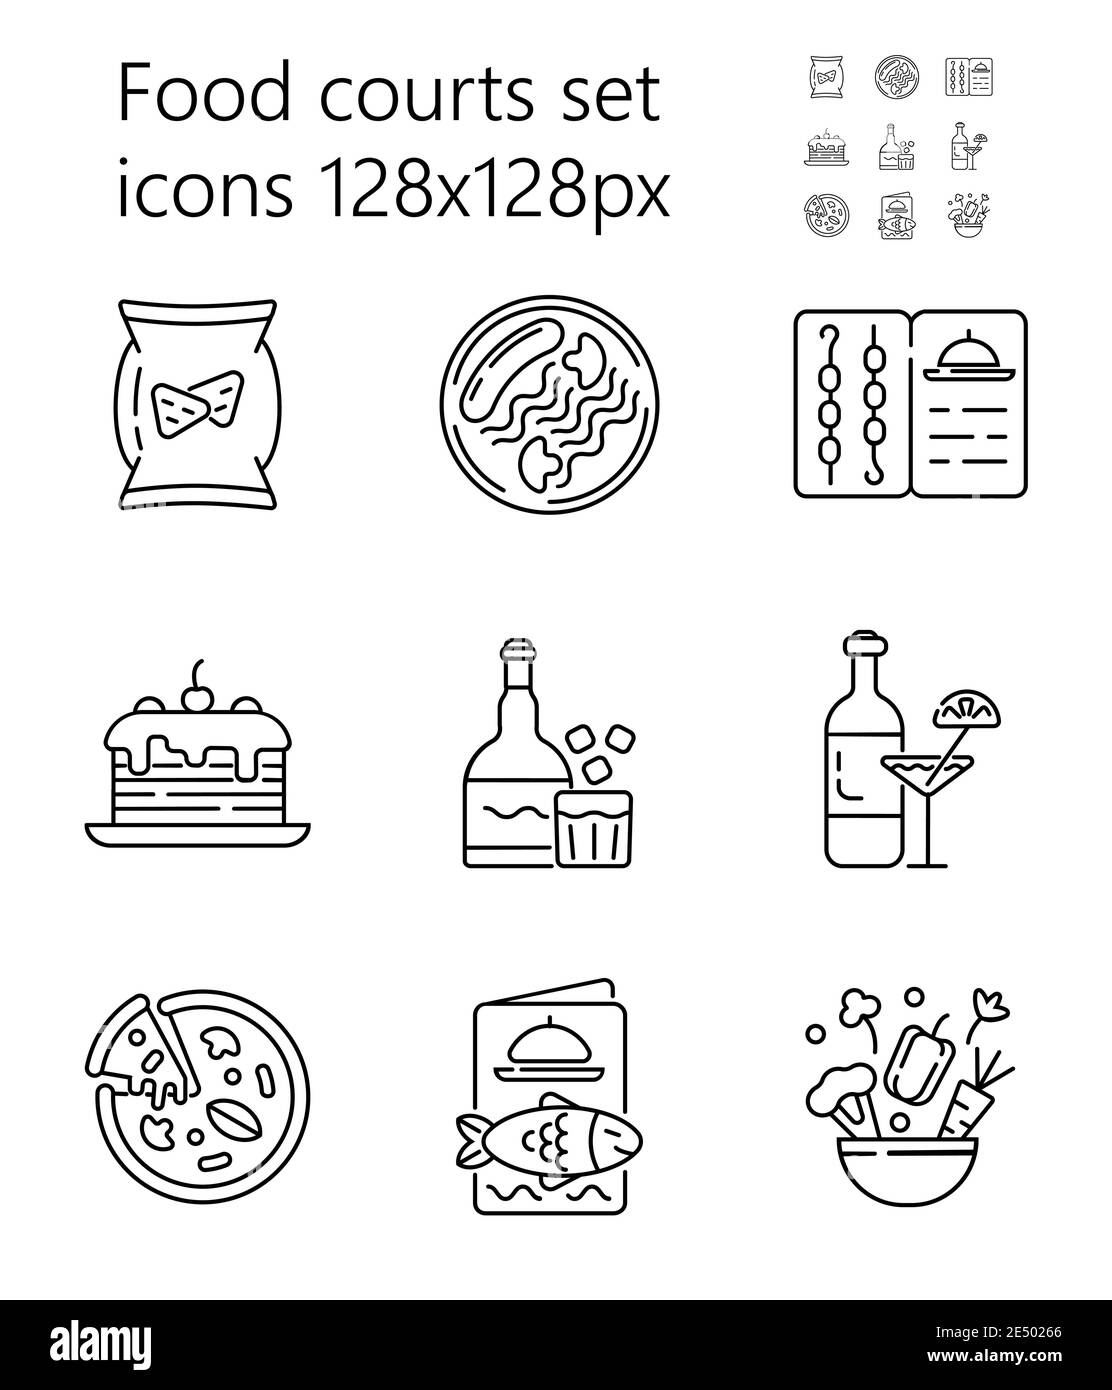 Food court icon set vector. Pizza, alcohol, drinks are shown. Grill, fish, seafood menu. Snacks, salad, torts are presented in outline style. Stock Vector